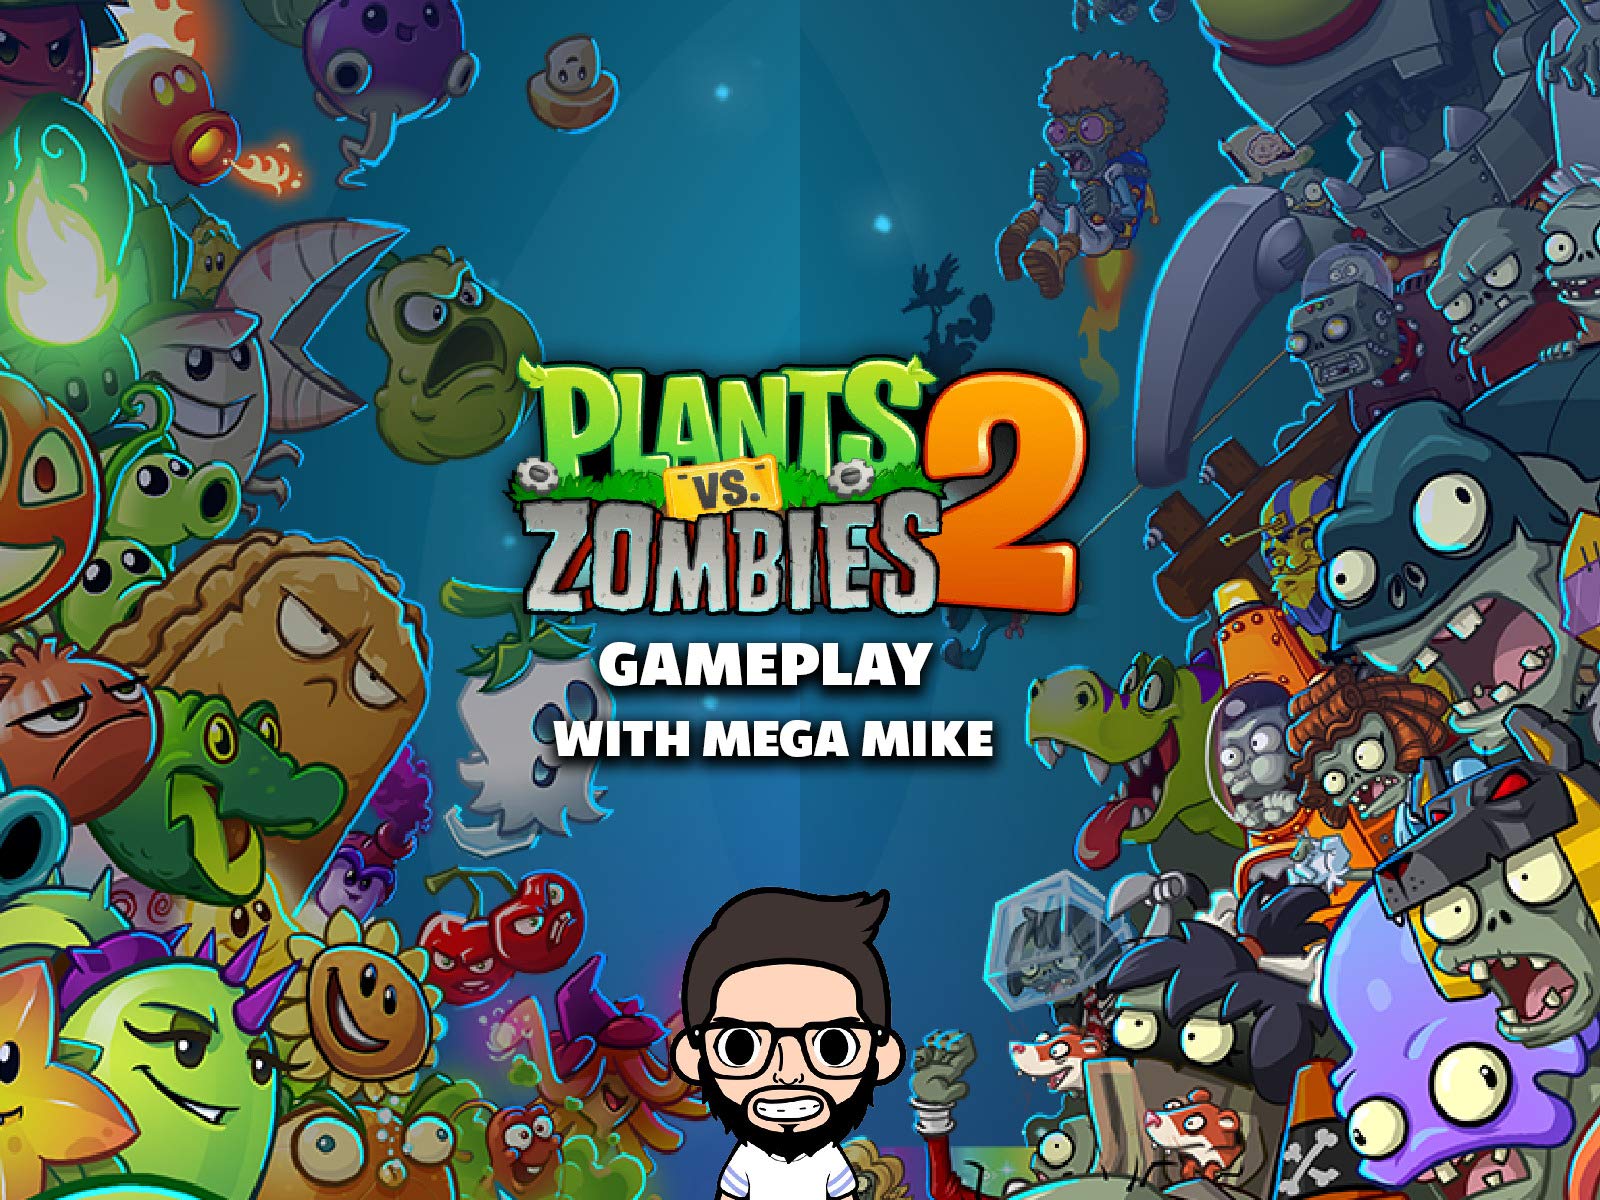 Watch Clip: Plants Vs Zombies 2 Gameplay With Mega Mike